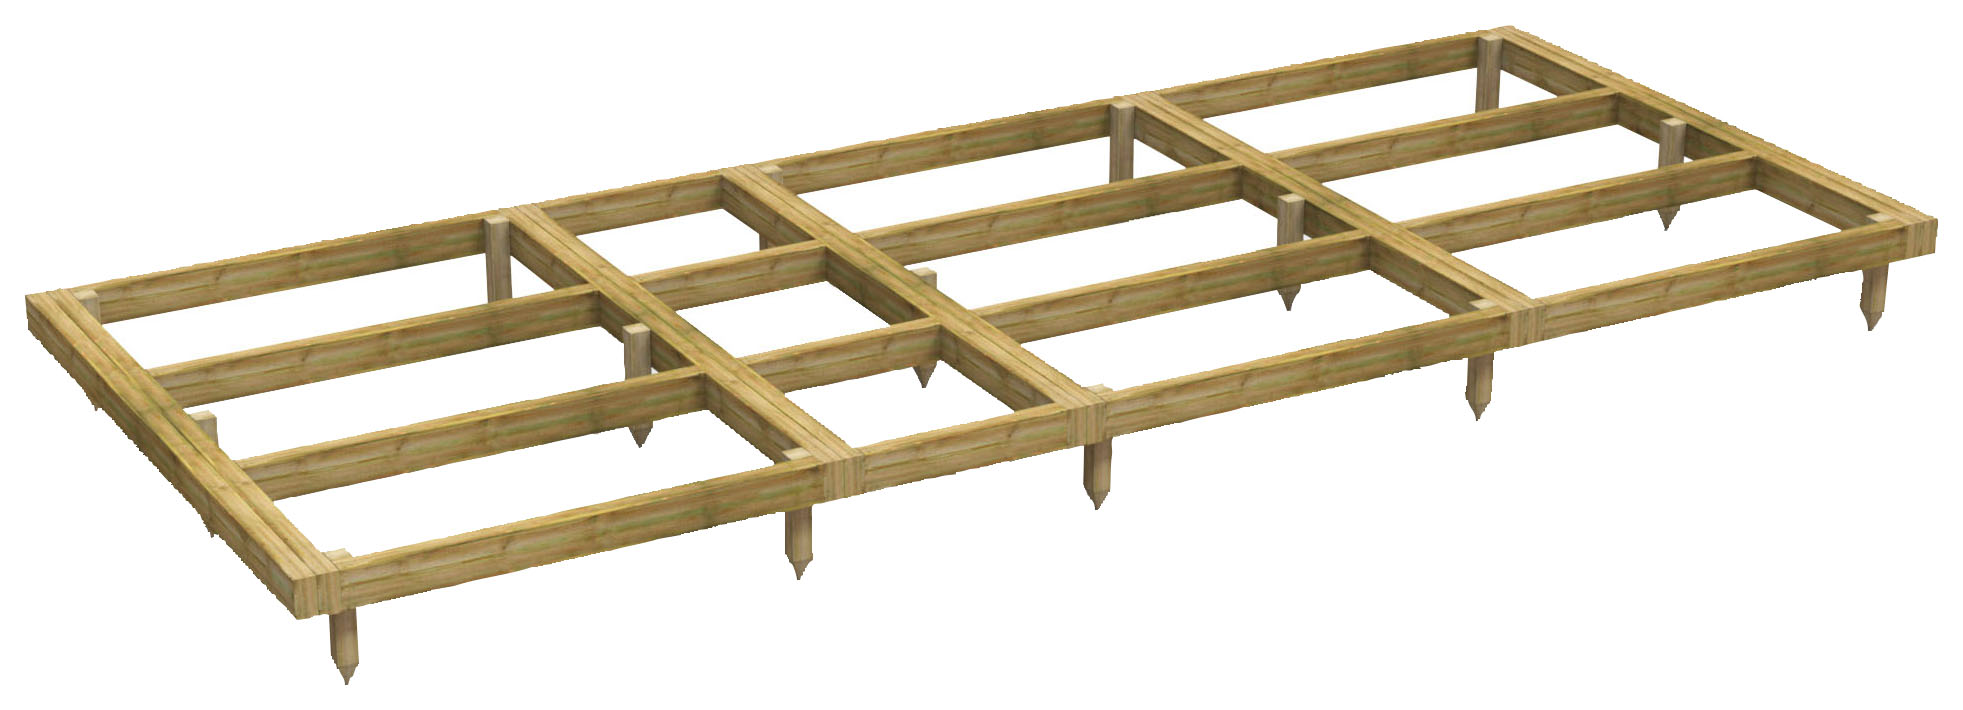 Power Sheds Pressure Treated Garden Building Base Kit - 14 x 6ft